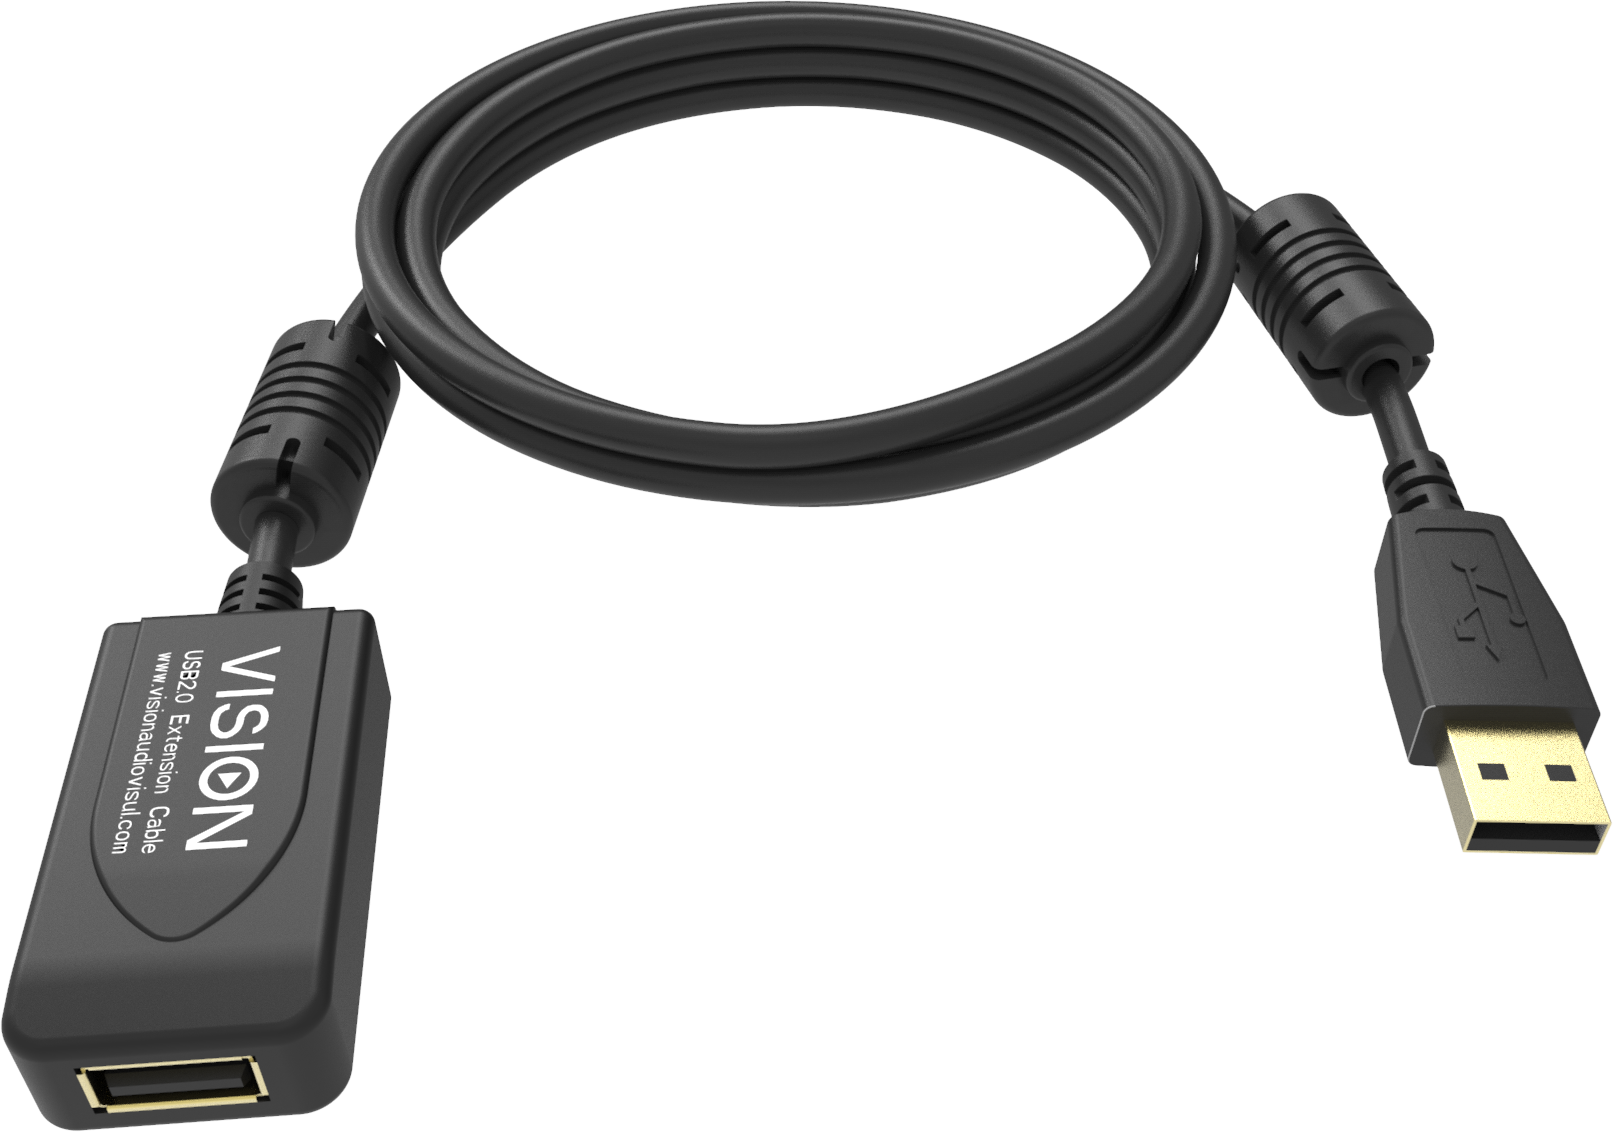 An image showing Black USB 2.0 Extension Cable 5m (16ft) with active booster